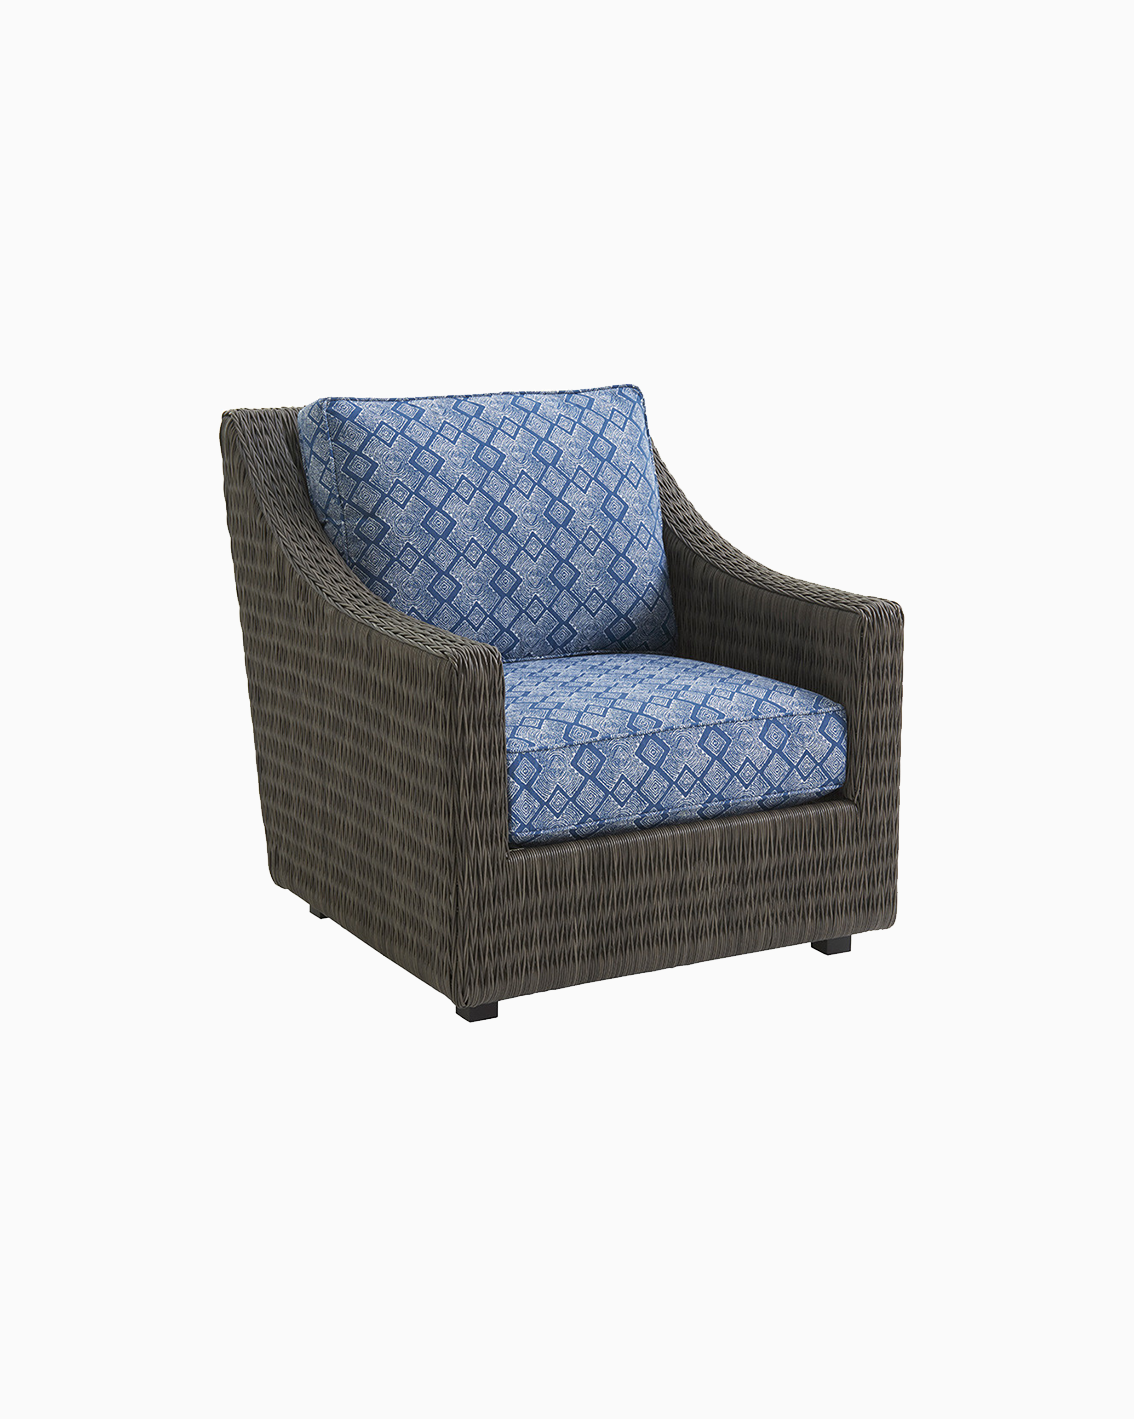 Cypress Point Lounge Chair